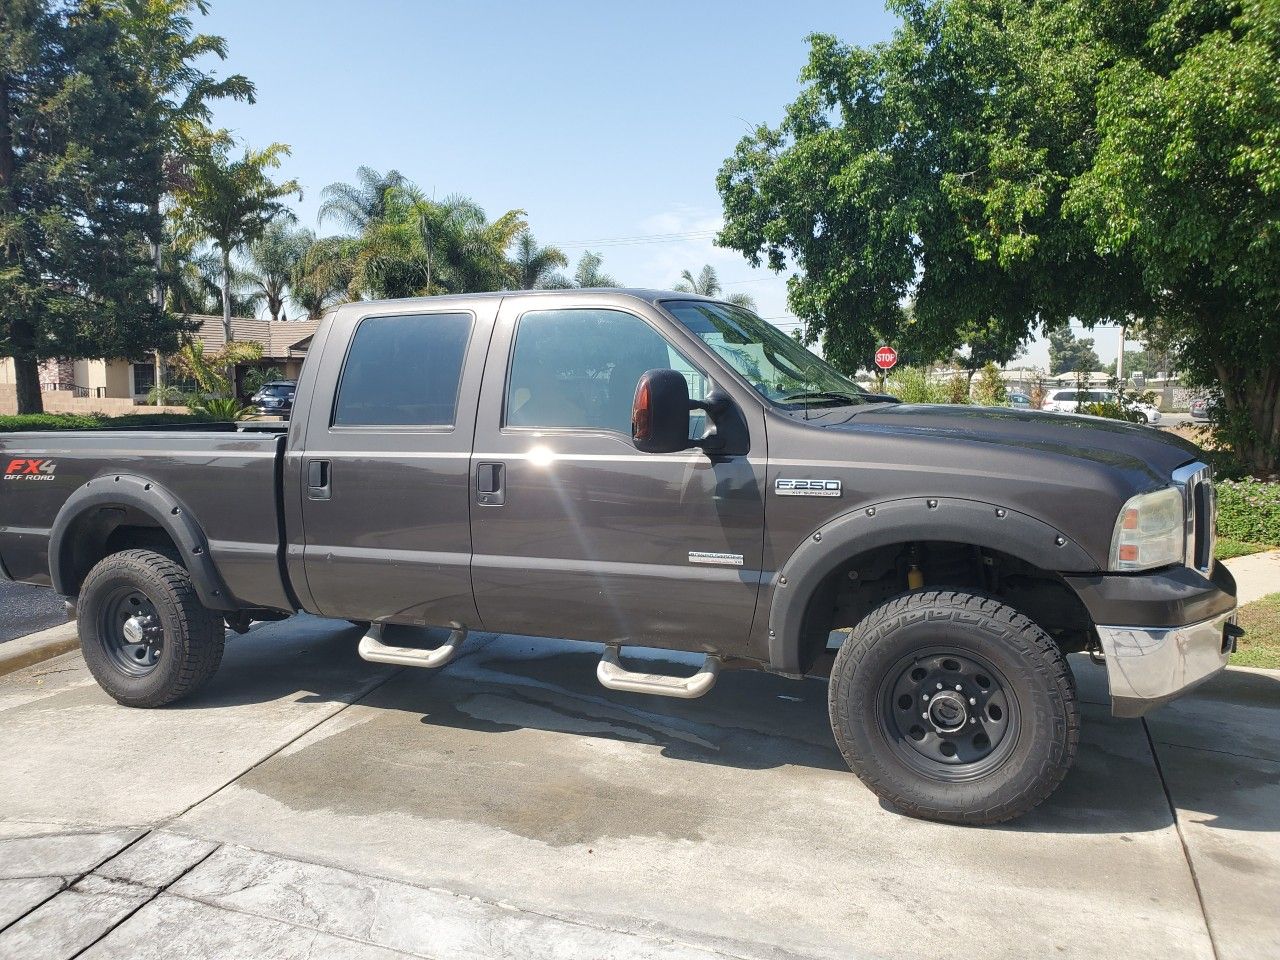 Ford F250 Superduty -DIESEL / Clean Title / Title in Hand-$15,500